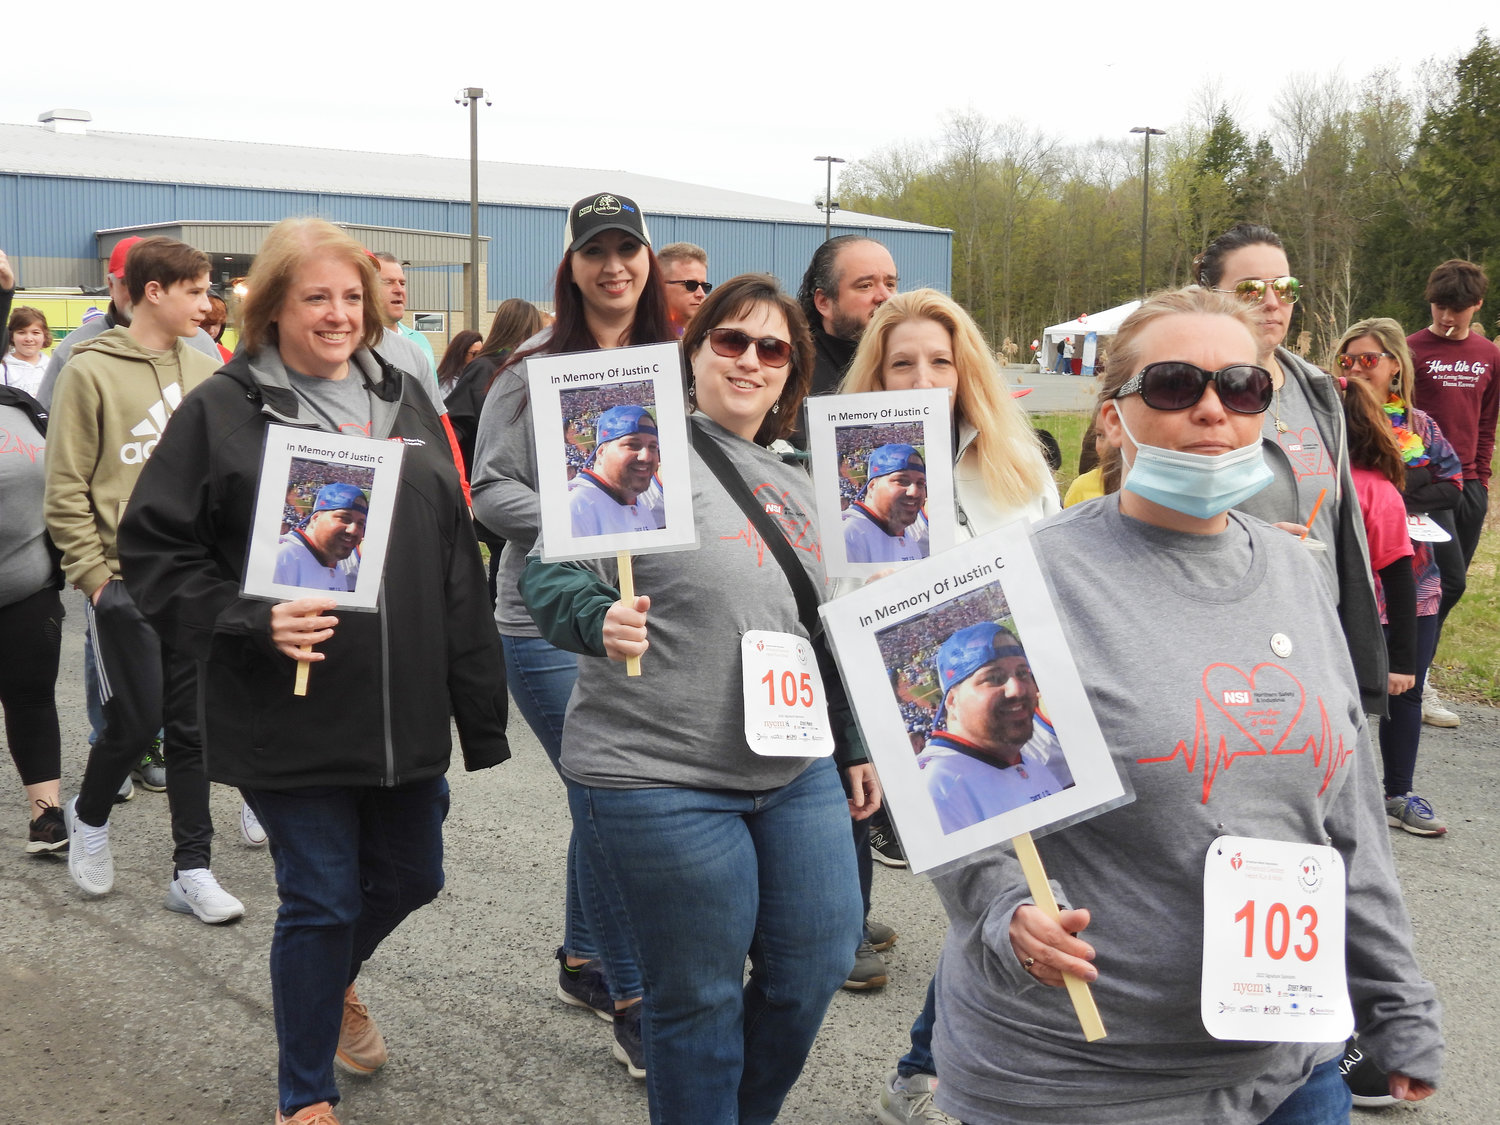 Walkers set out for the America’s Greatest Heart Run and Walk on Satuday, May 7 from Accelerate Sports, walking the 3k to raise awareness and support for heart health